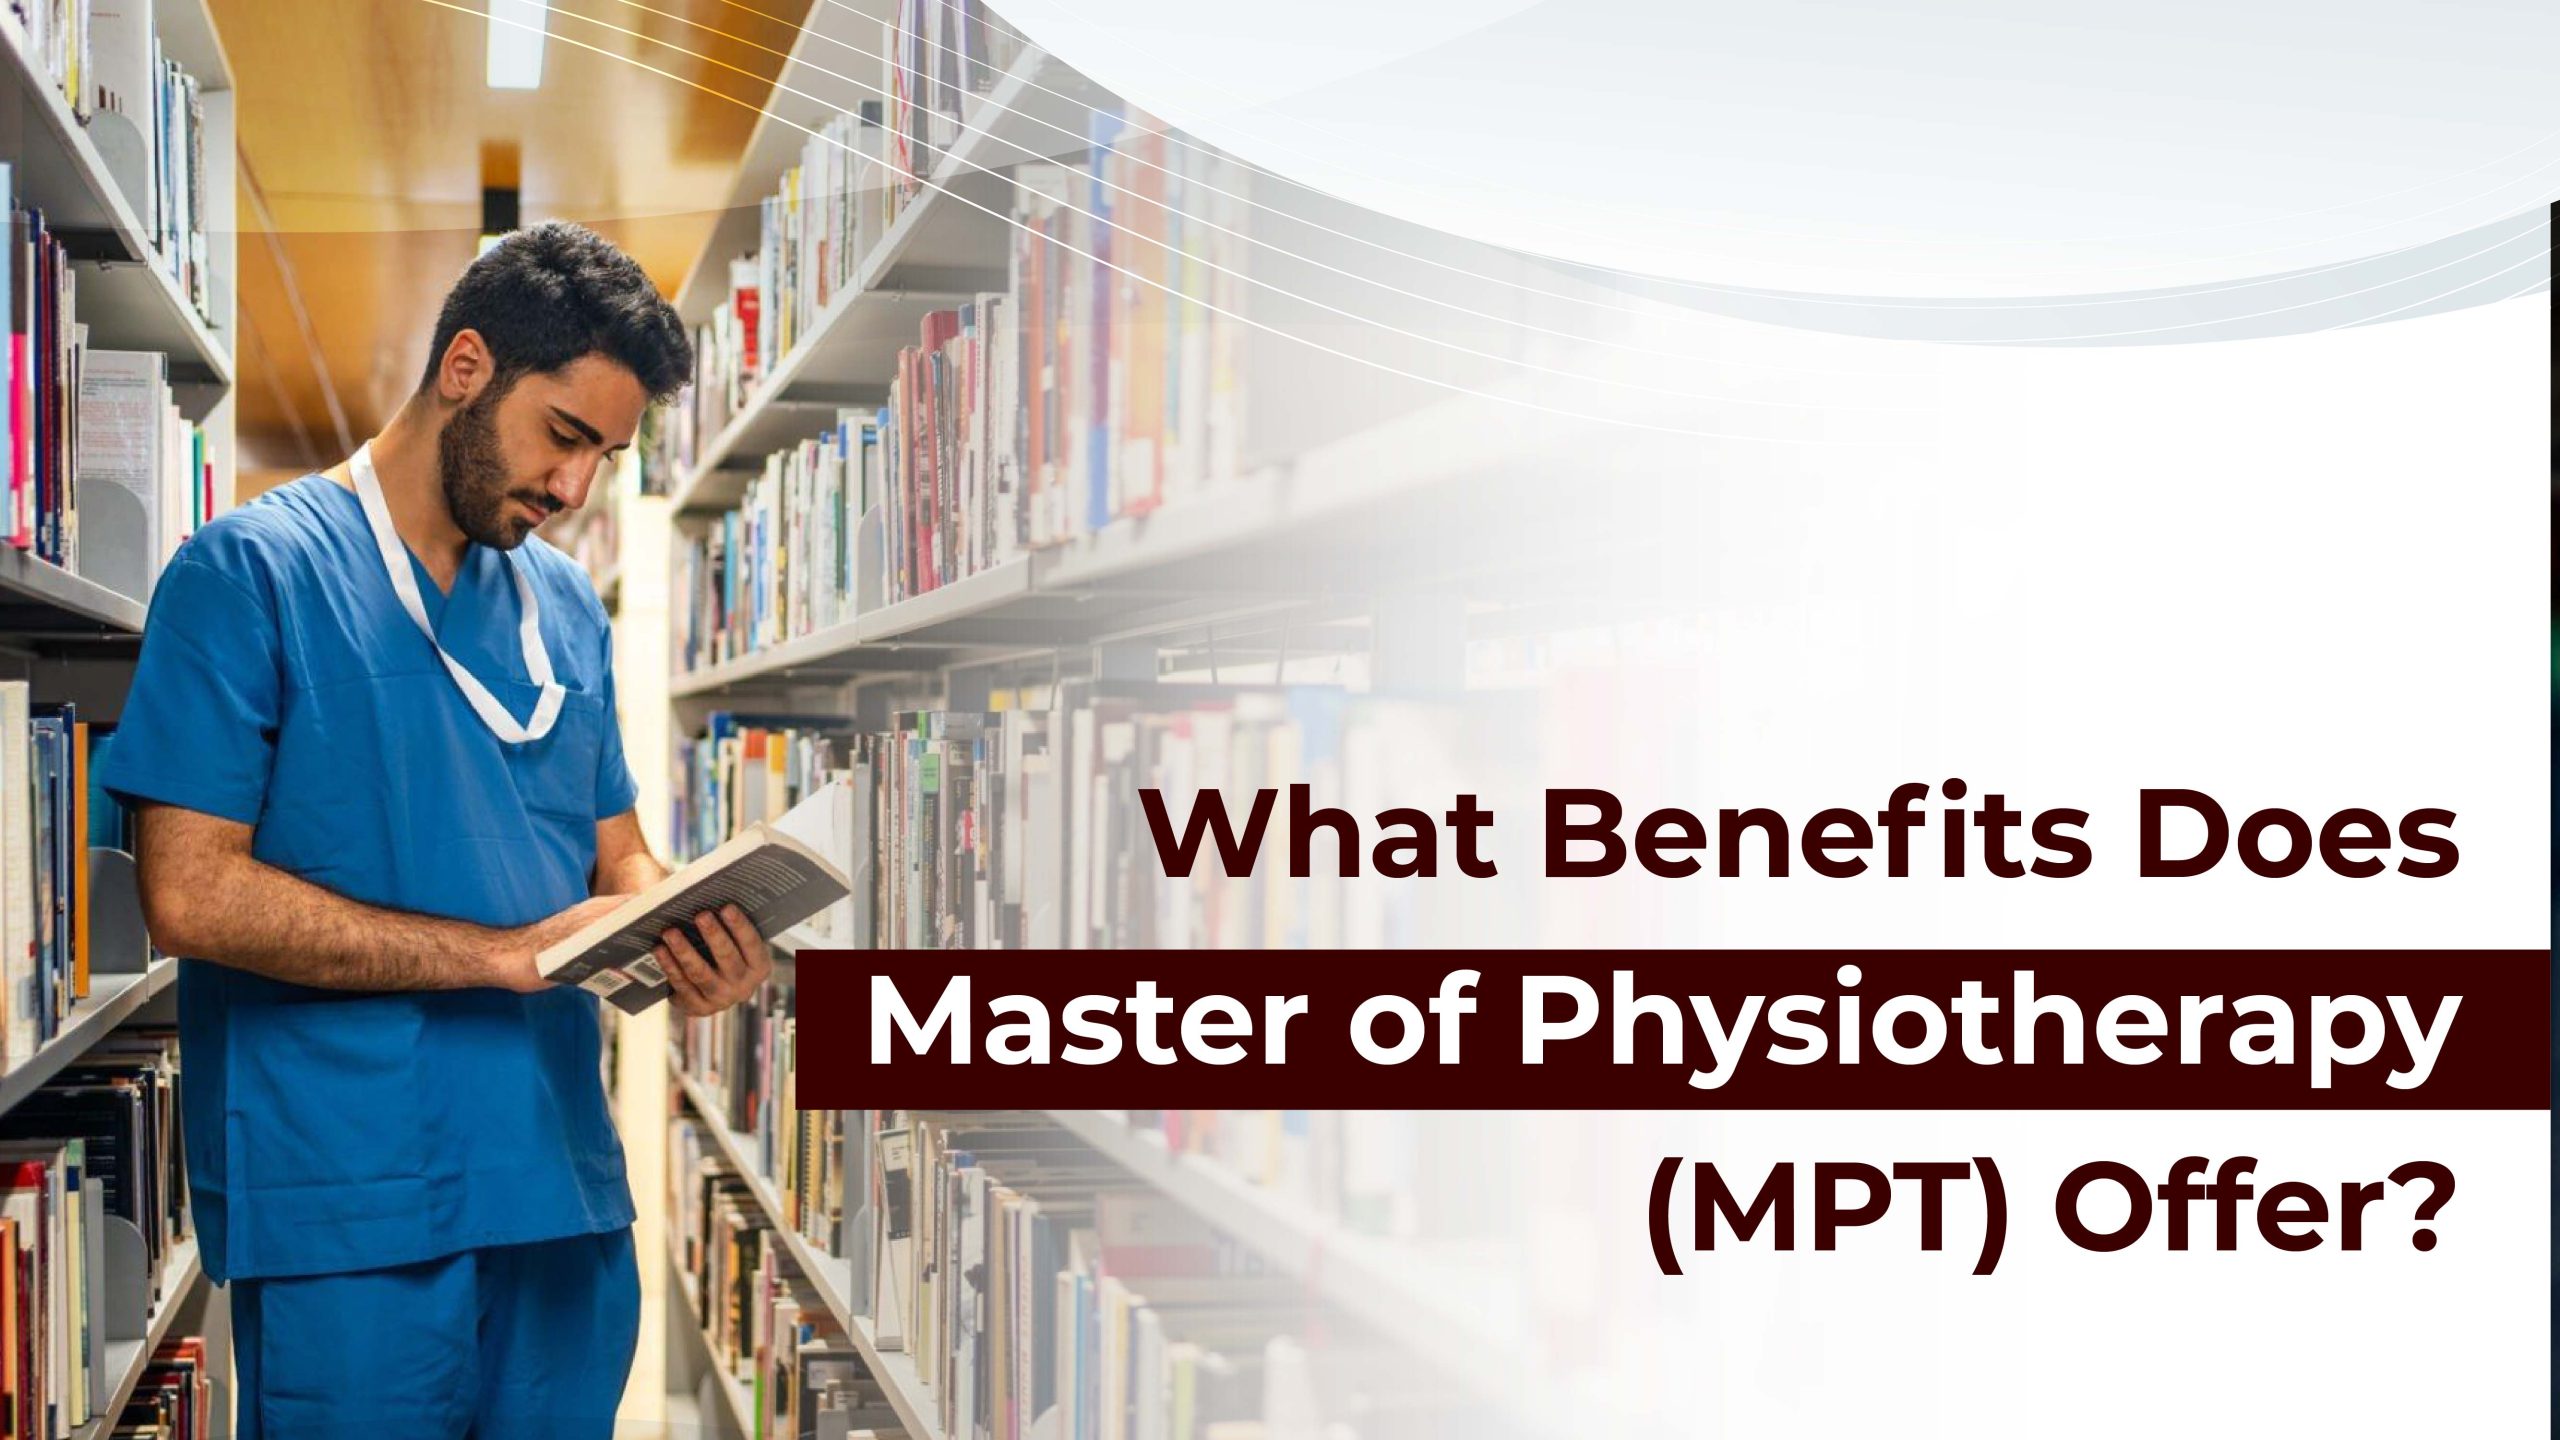 What Benefits Does Master of Physiotherapy (MPT) Offer?